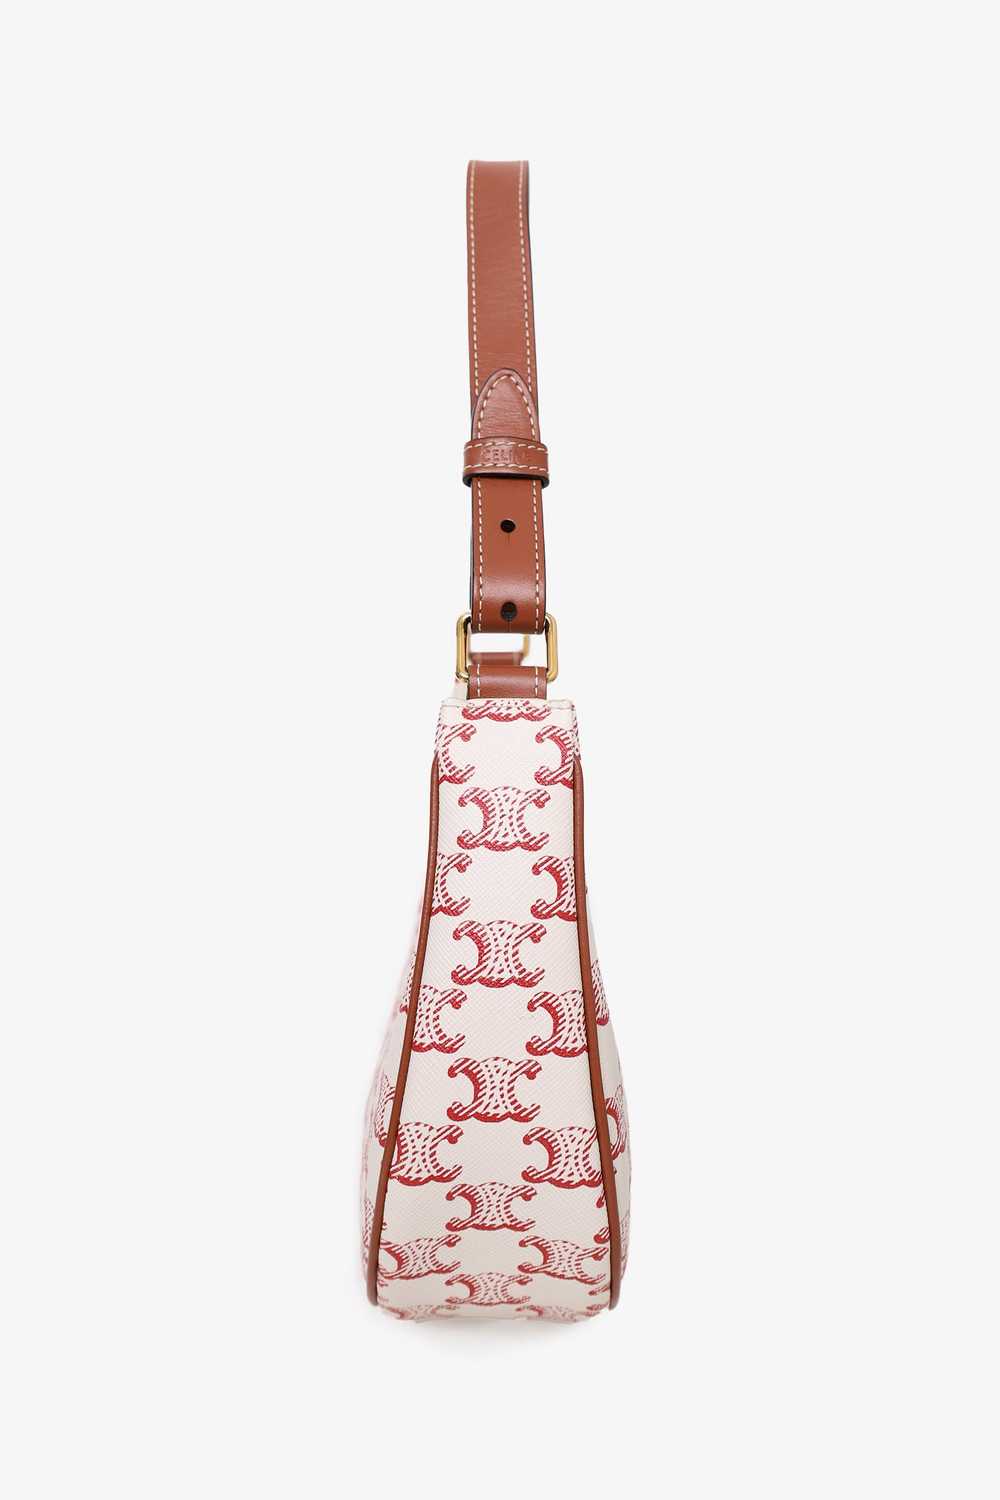 Celine White/Red Canvas/Leather Triomphe Ava Shou… - image 2